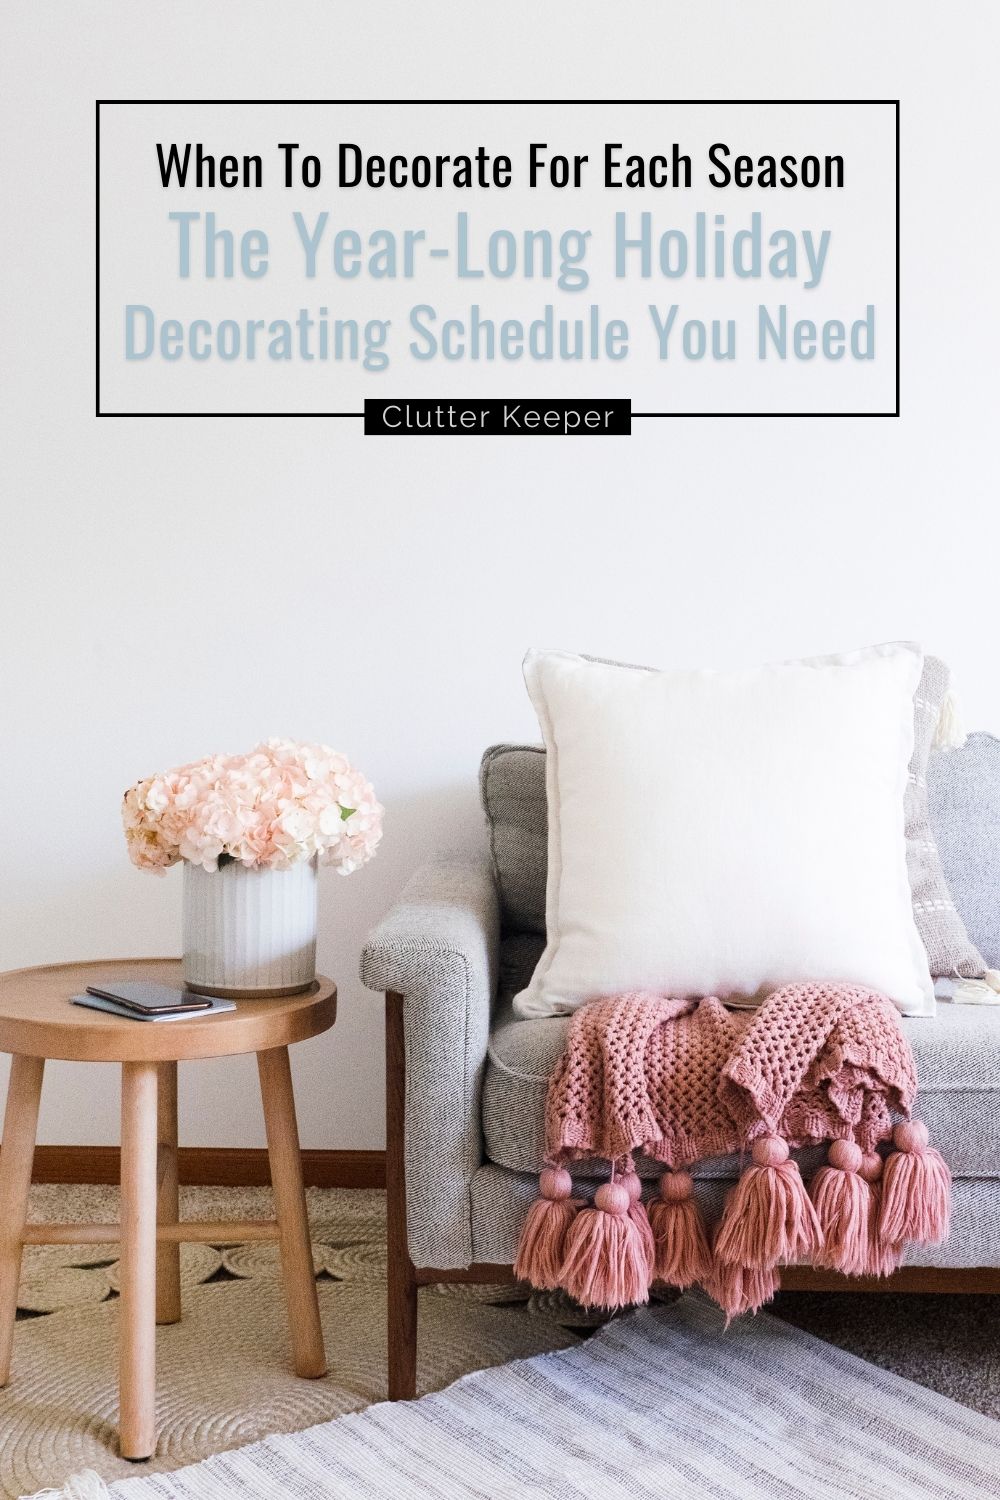 How to decorate for each season: the year-long holiday decorating schedule you need.